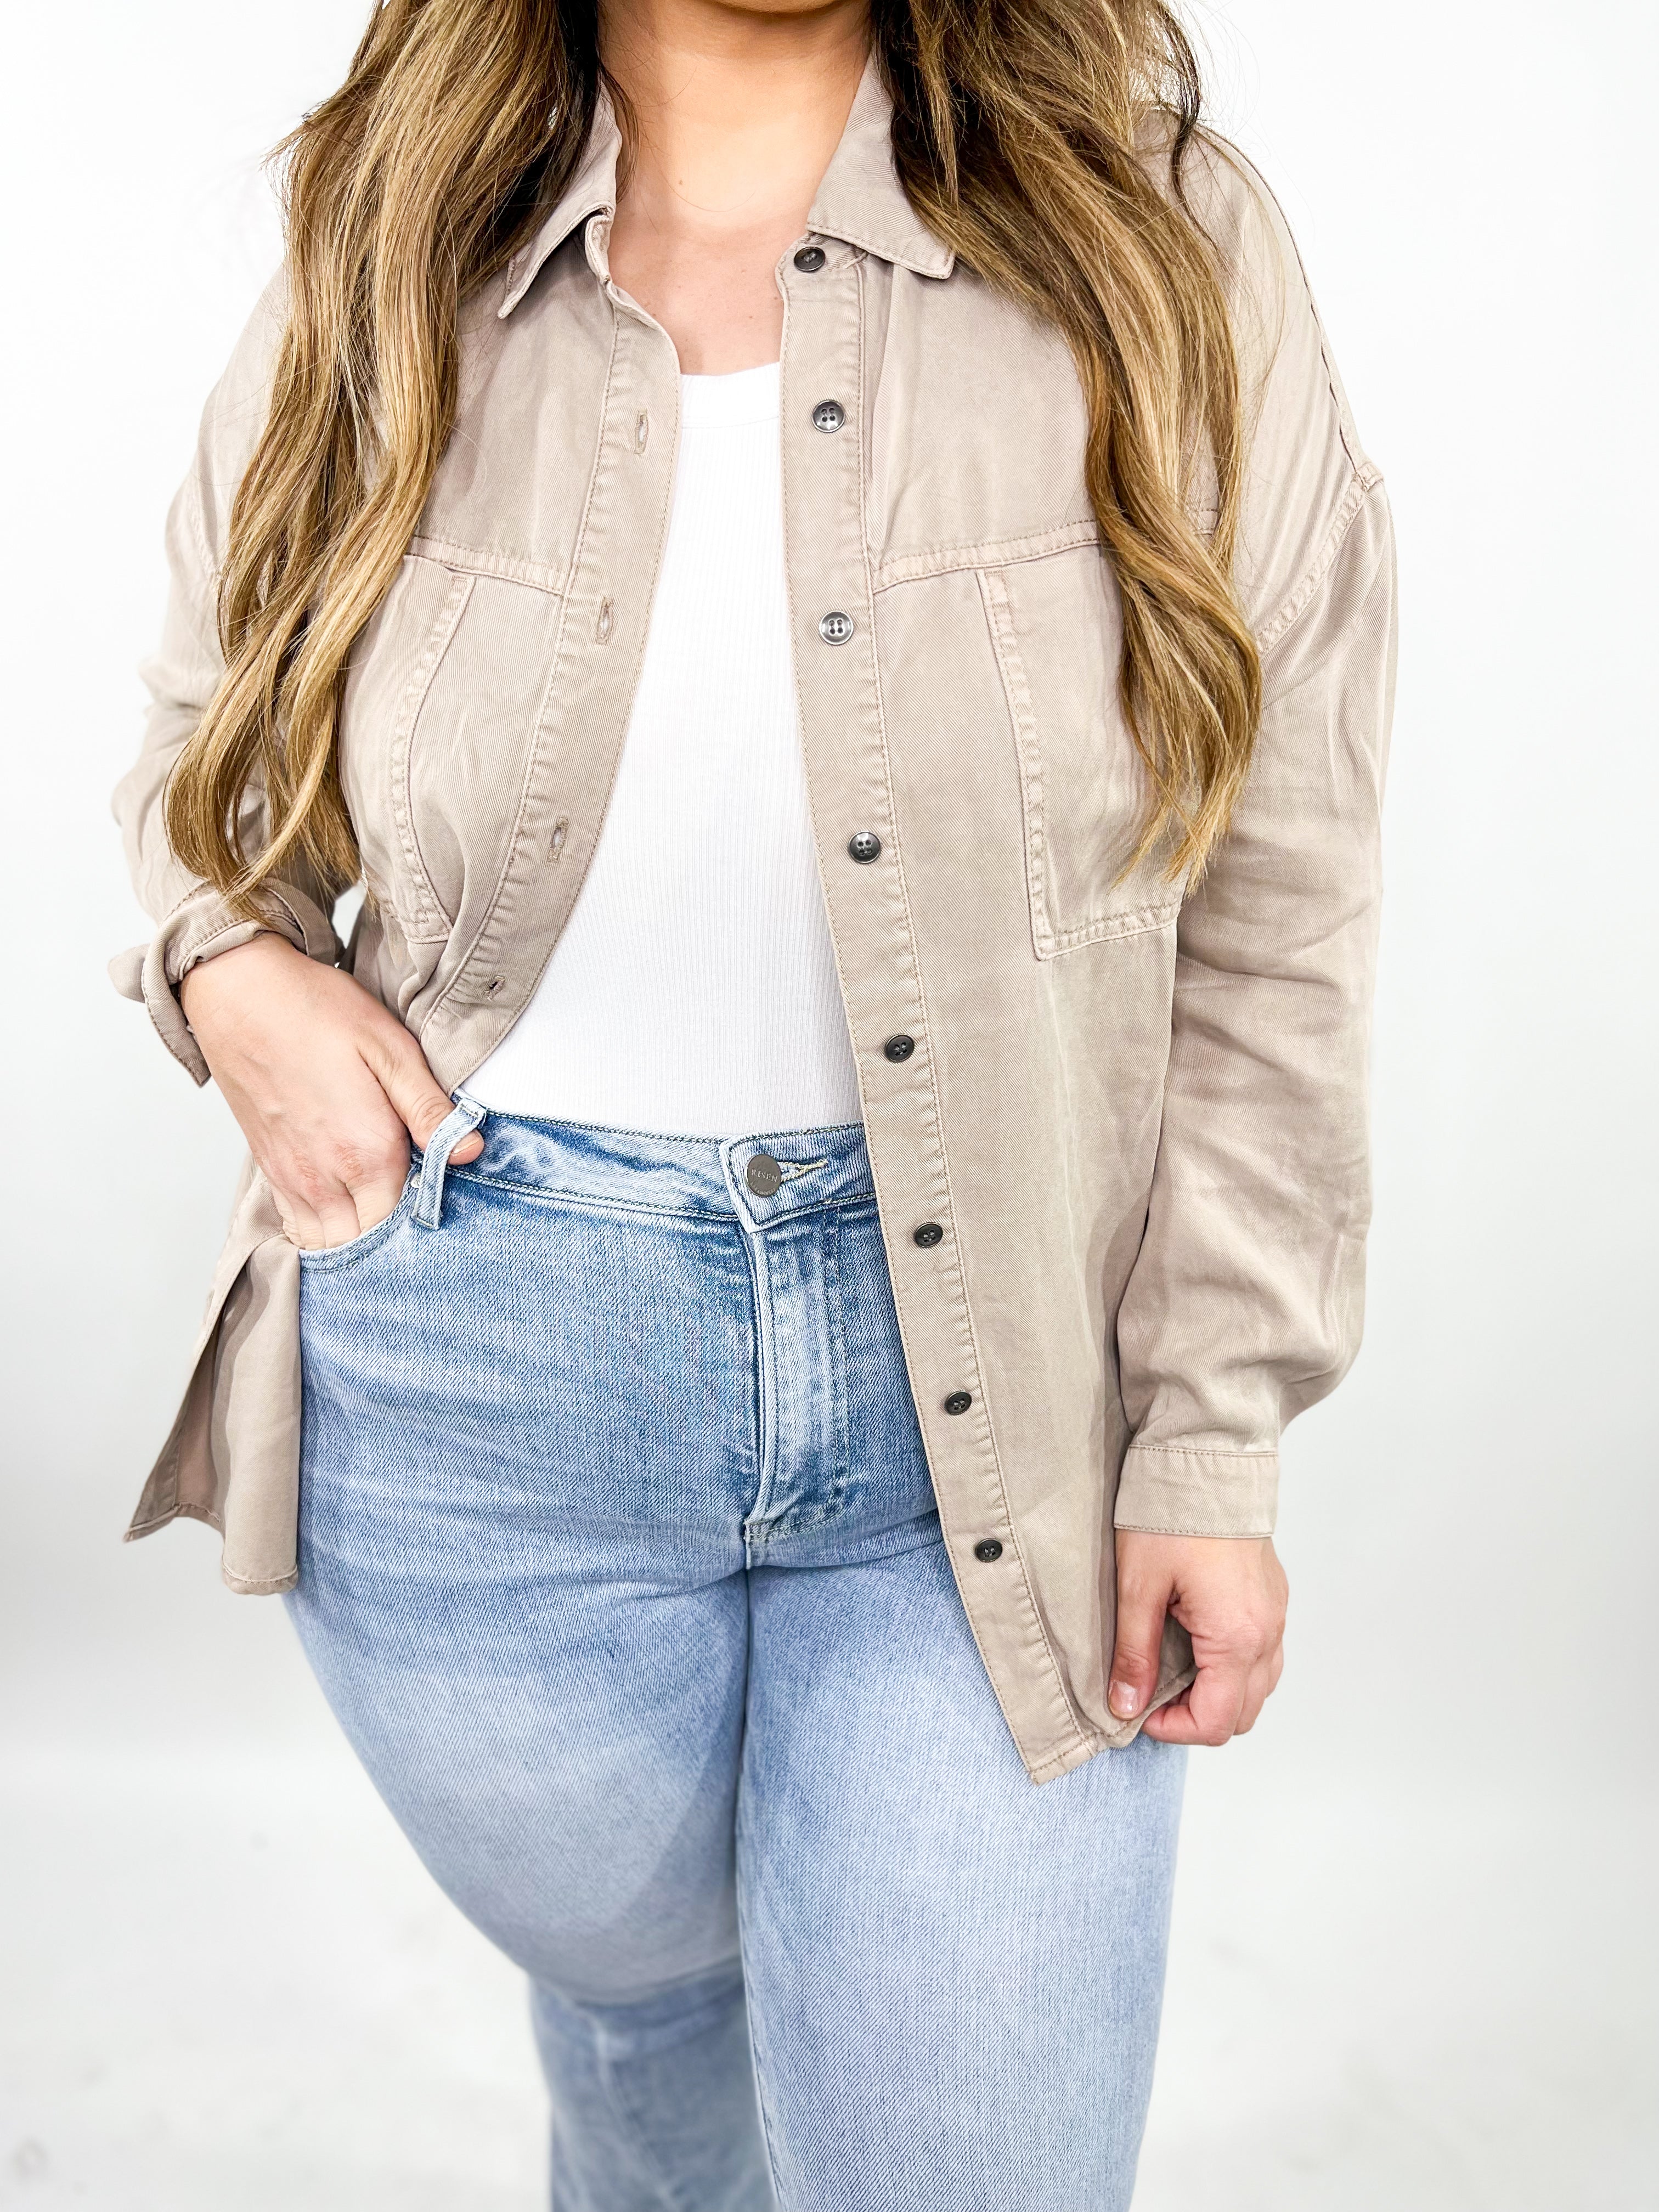 Not Your Boyfriend's Button Down Top-120 Long Sleeve Tops-Risen Jeans-Heathered Boho Boutique, Women's Fashion and Accessories in Palmetto, FL